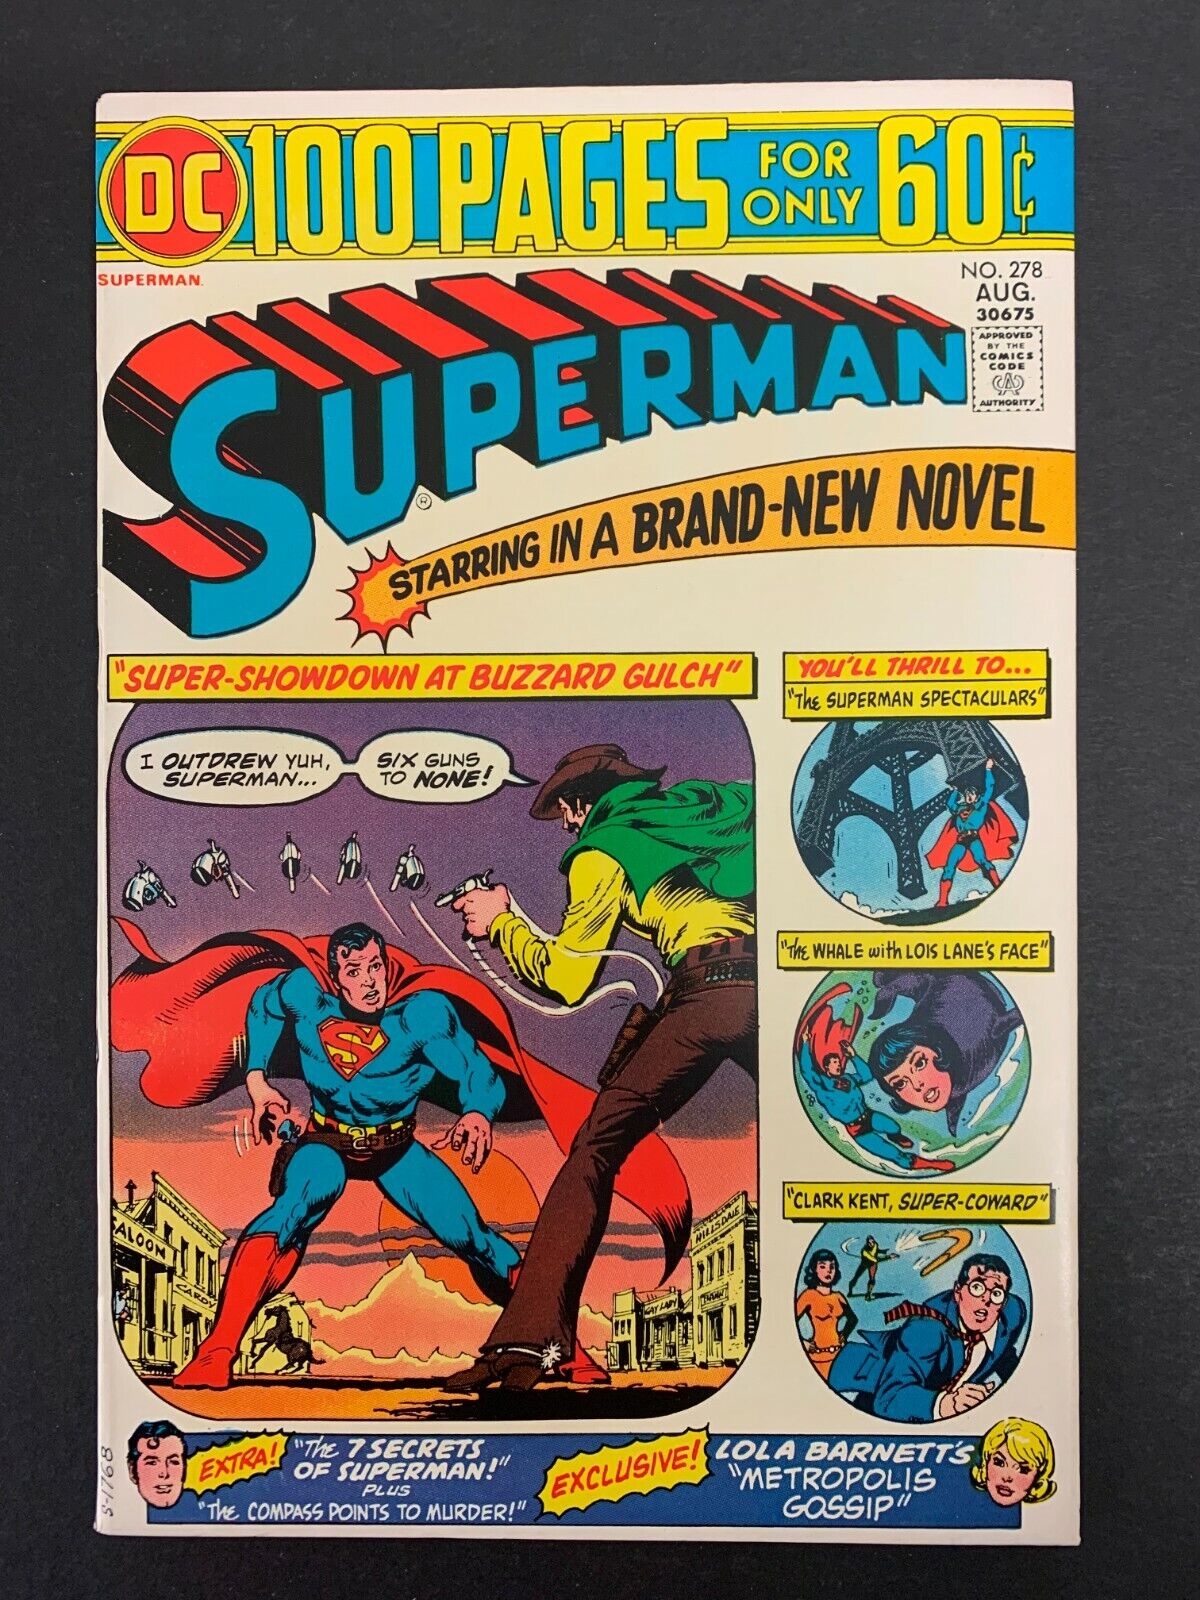 SUPERMAN #278 *HIGH GRADE* (DC, 1974)  100 PAGE GIANT  LOTS OF PICS